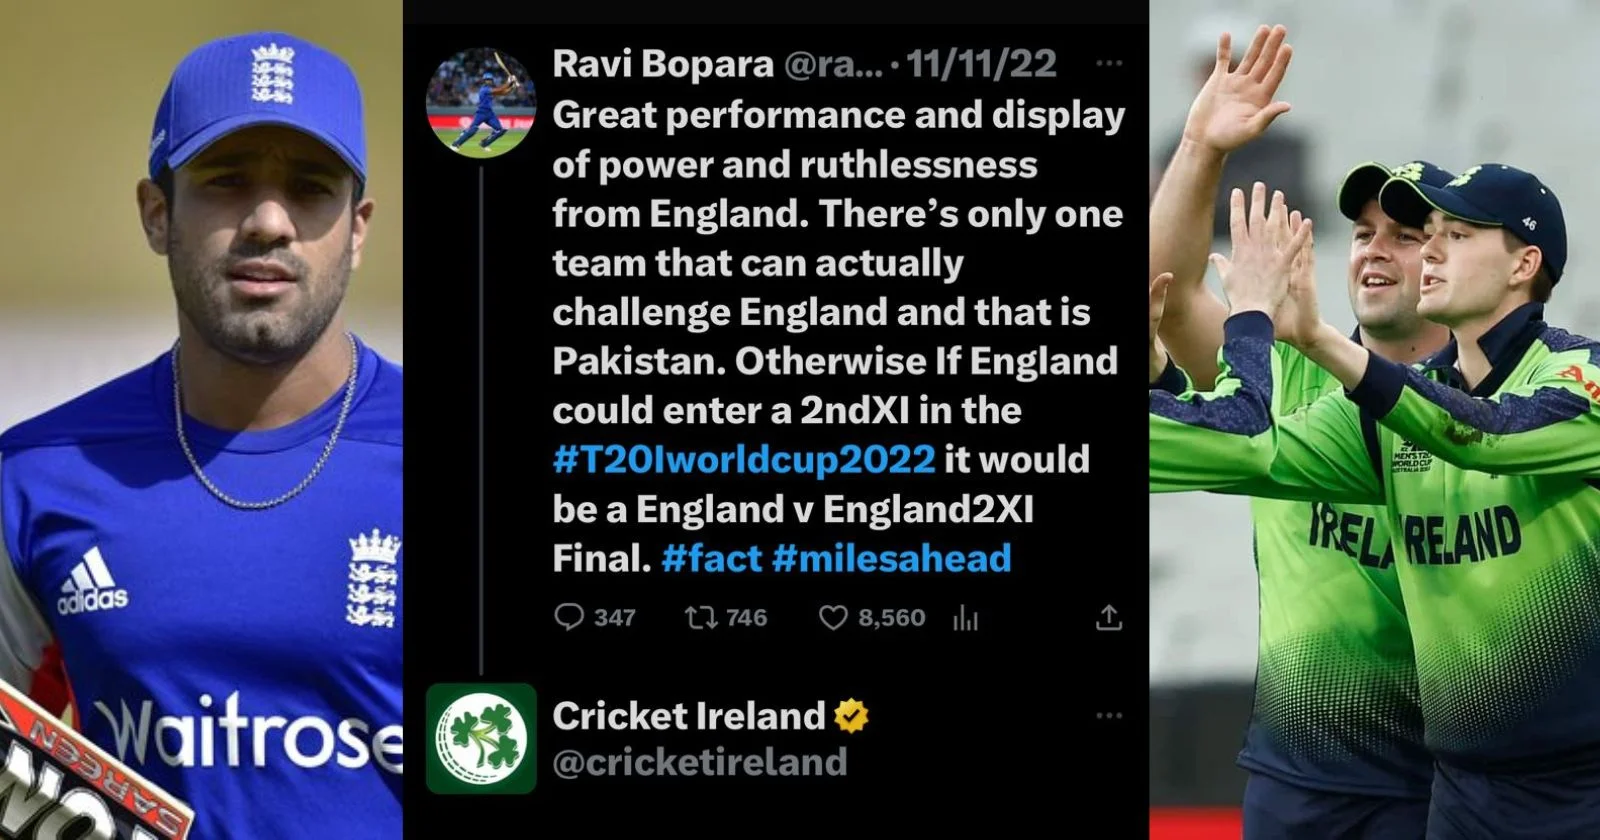 Irelands Smart Reply When Ravi Bopara Said That Only Pakistan Can Stop England In the T20 WC 2022